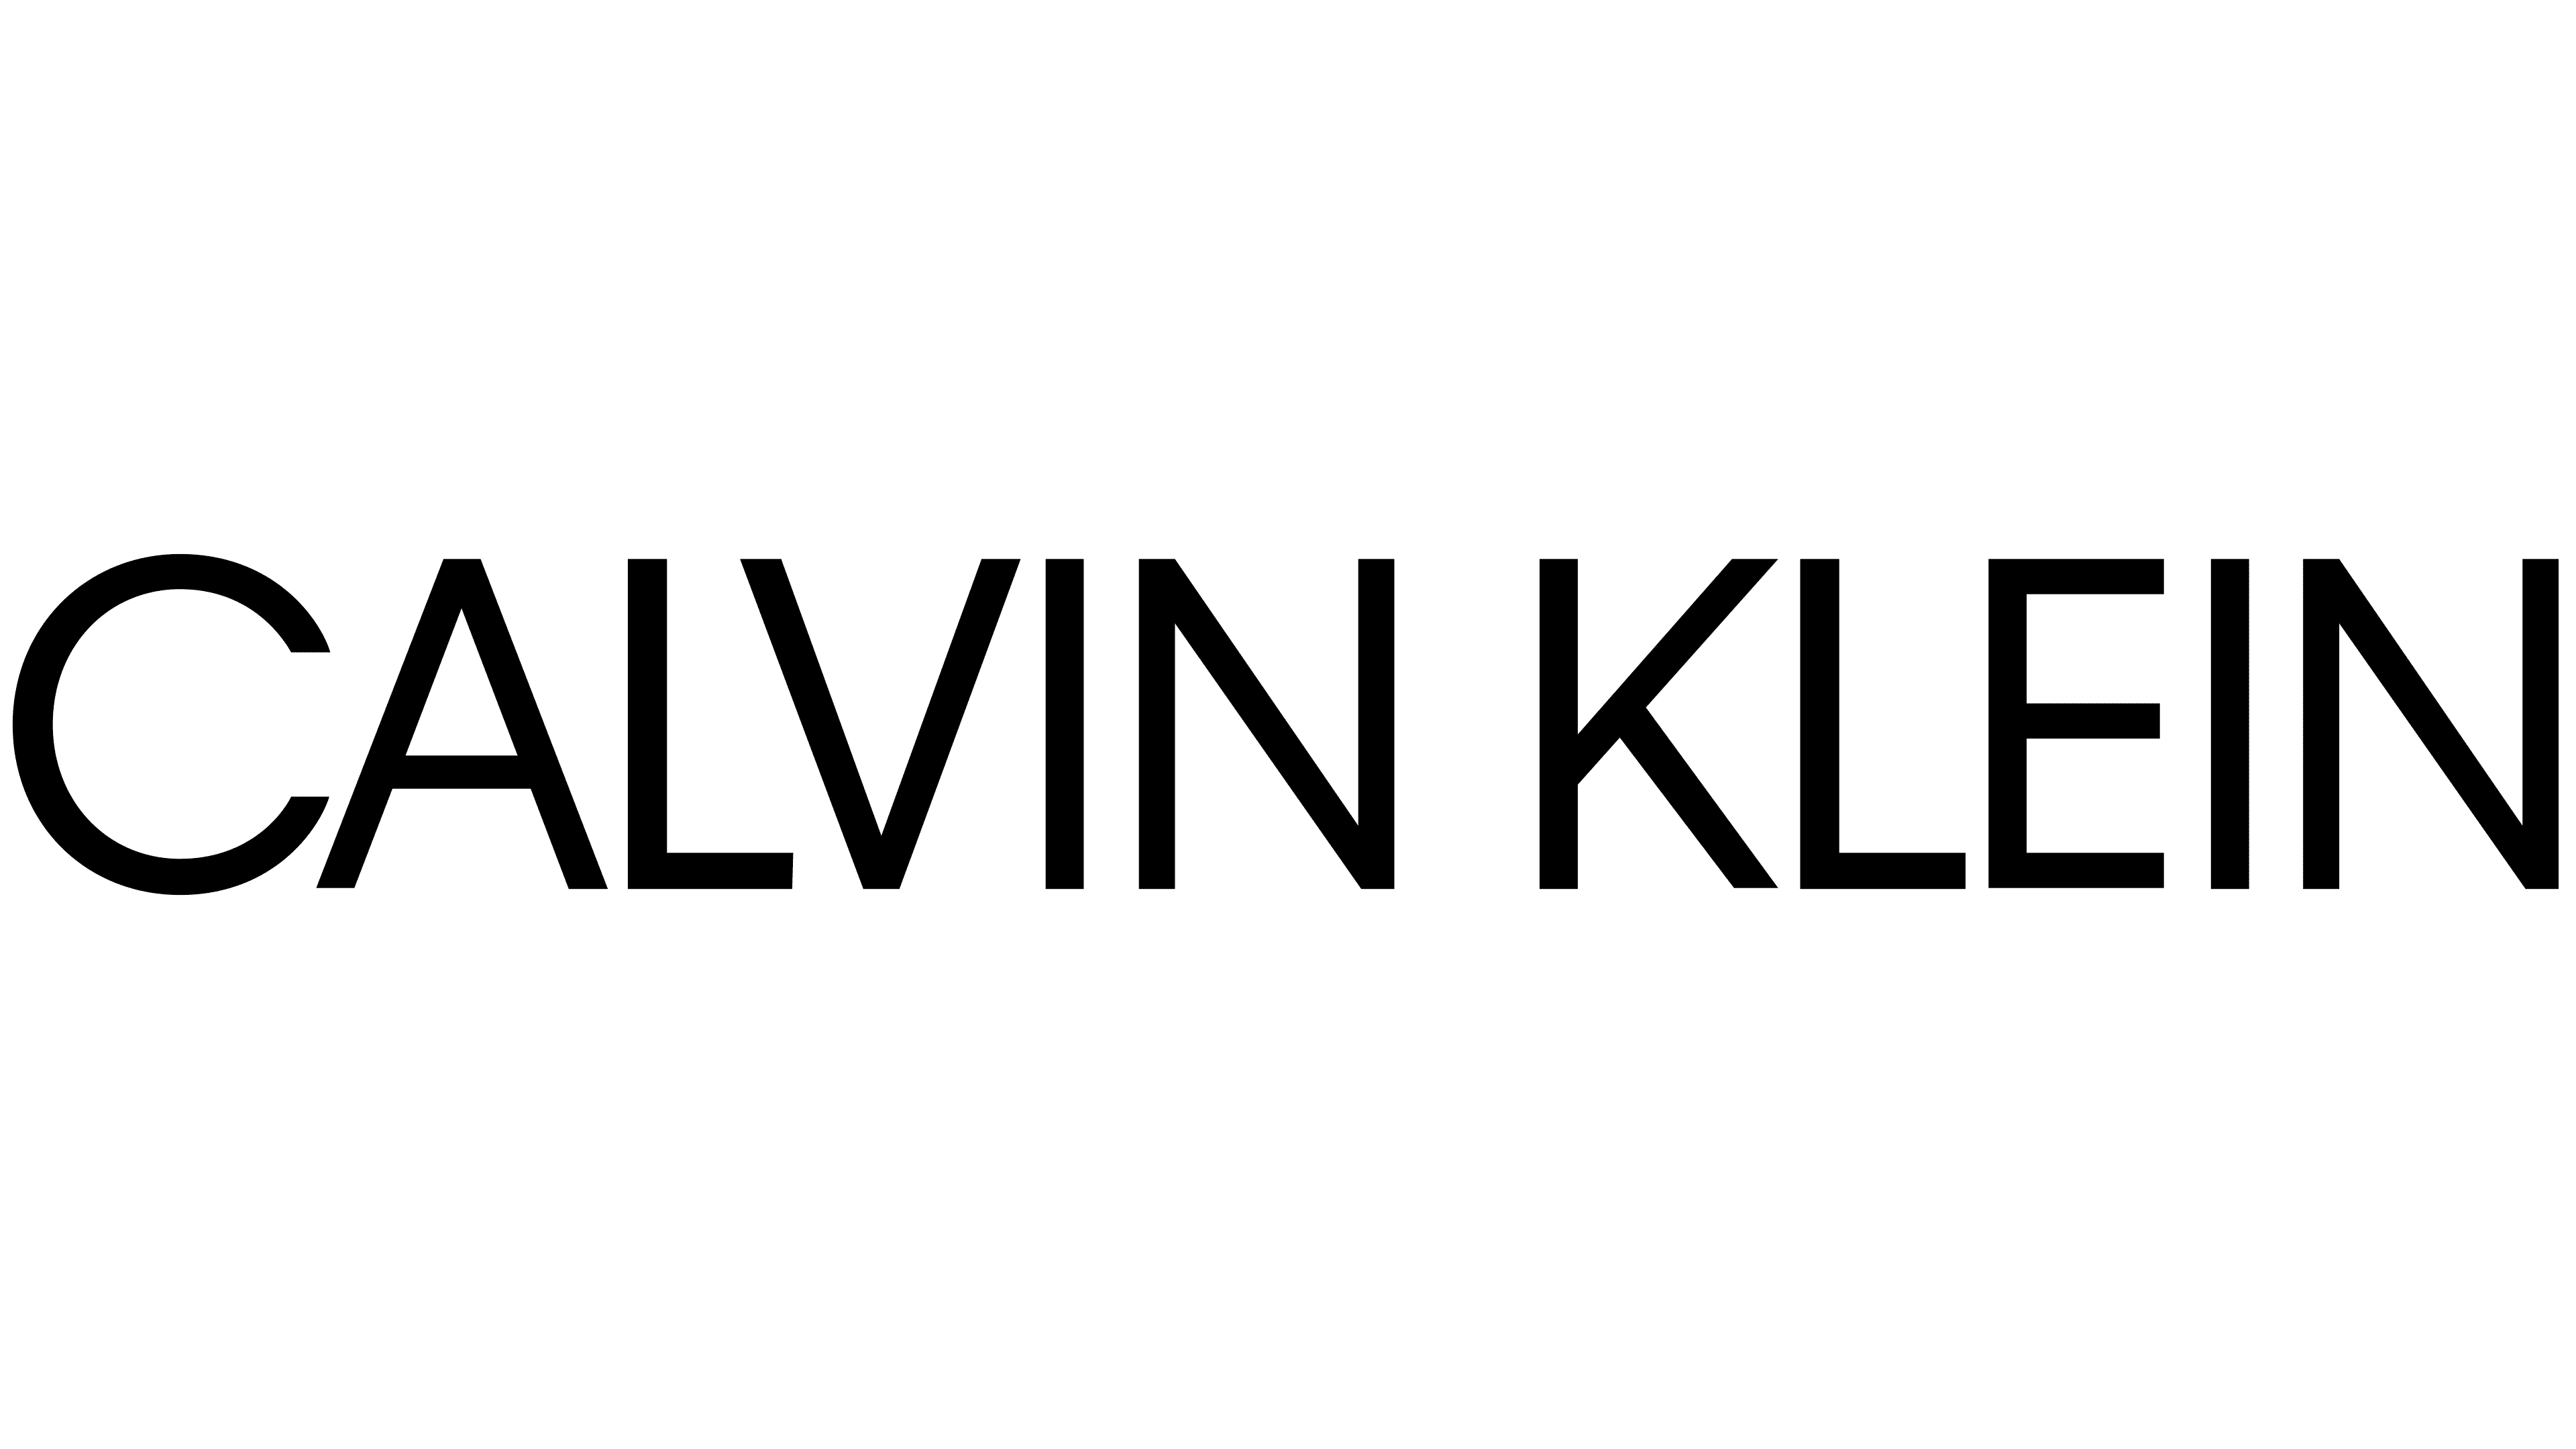 Calvin Klein Logo | The most famous brands and company logos in the world